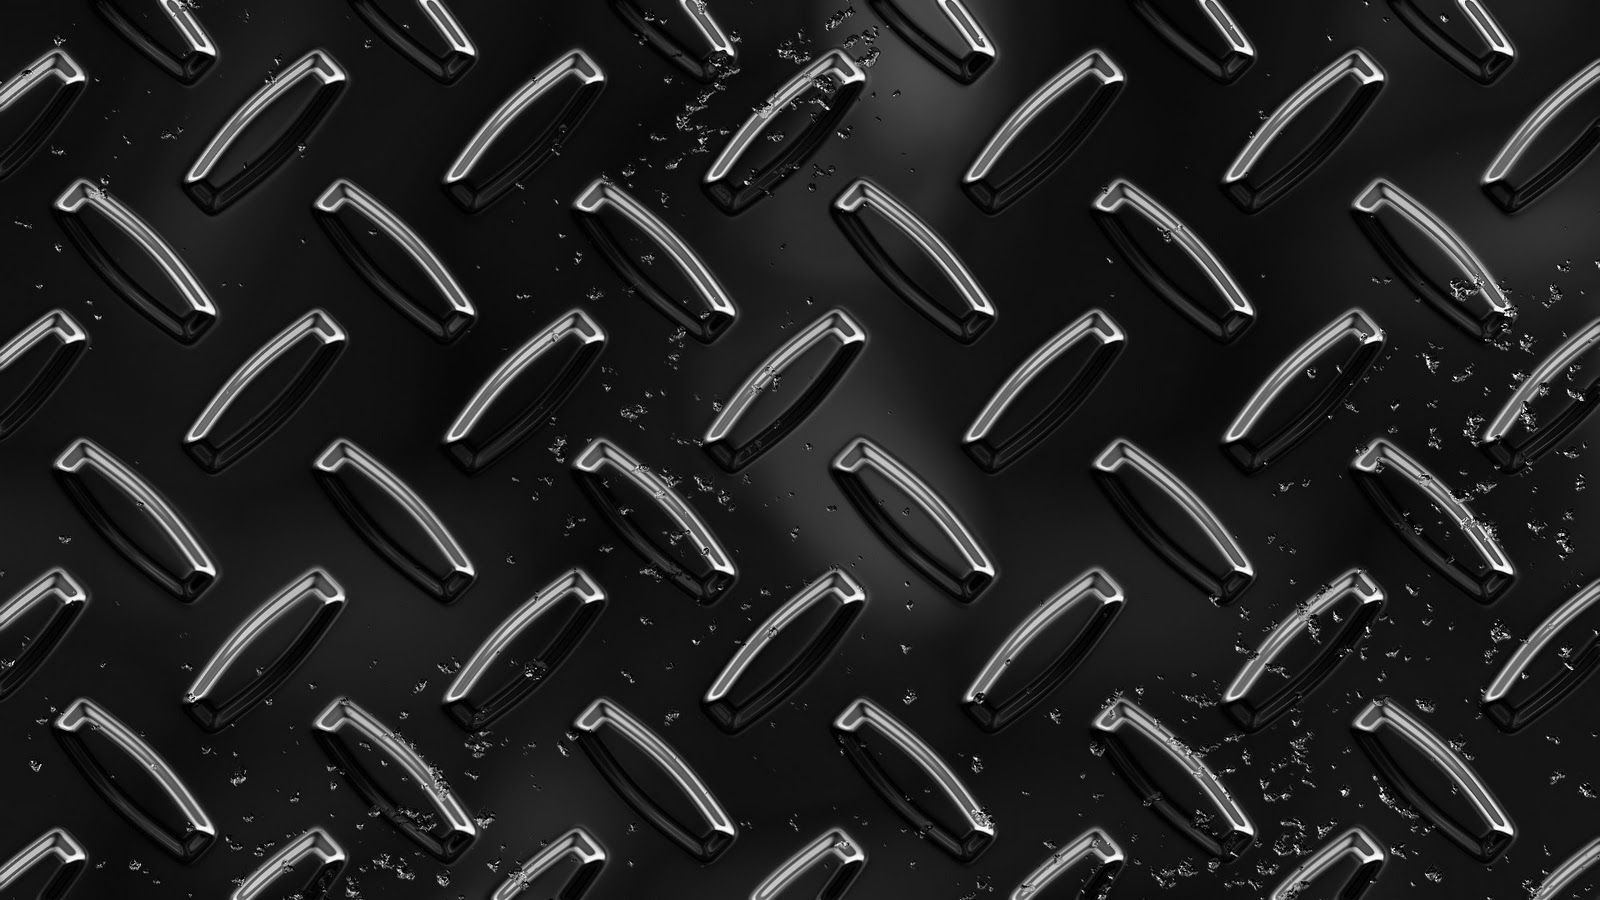 Only Black Wallpaper. Black and silver .com